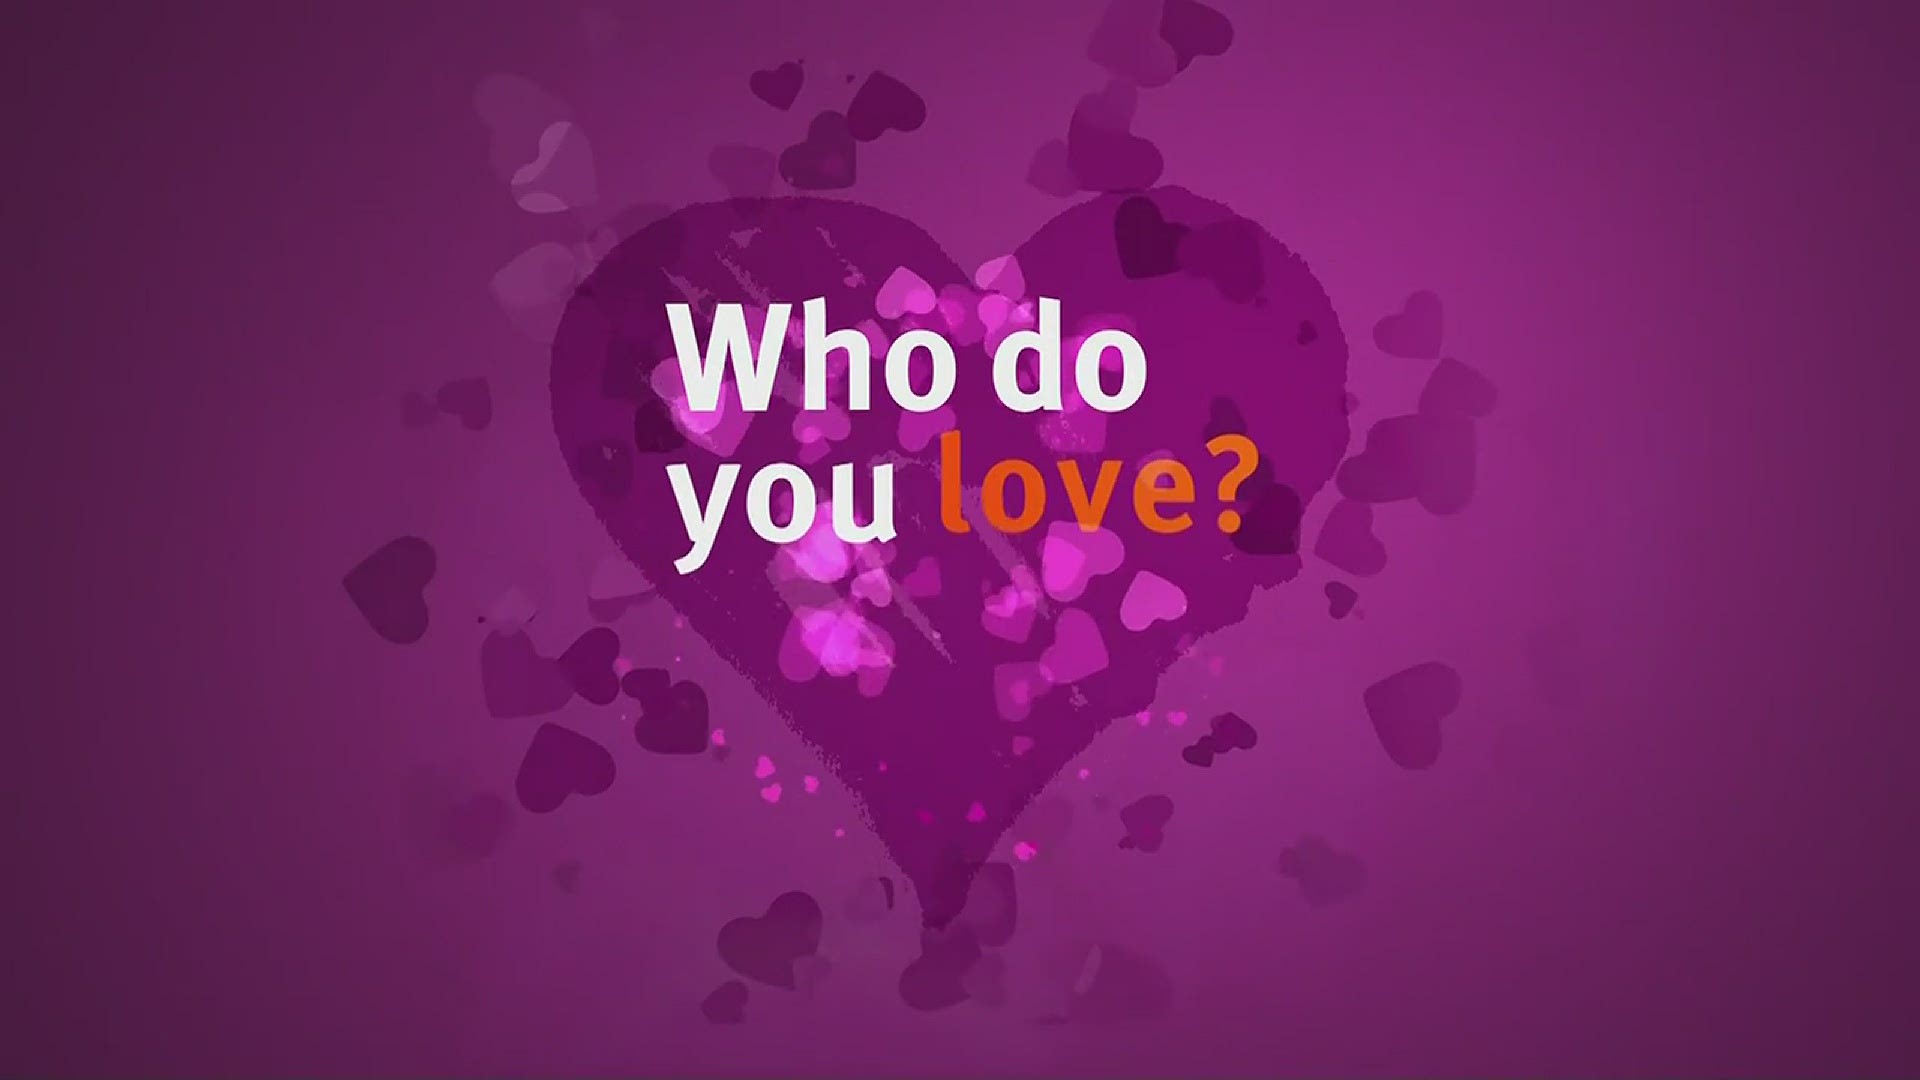 February is a special month in the annual Who Do You Love promotion for KREM and STCU.